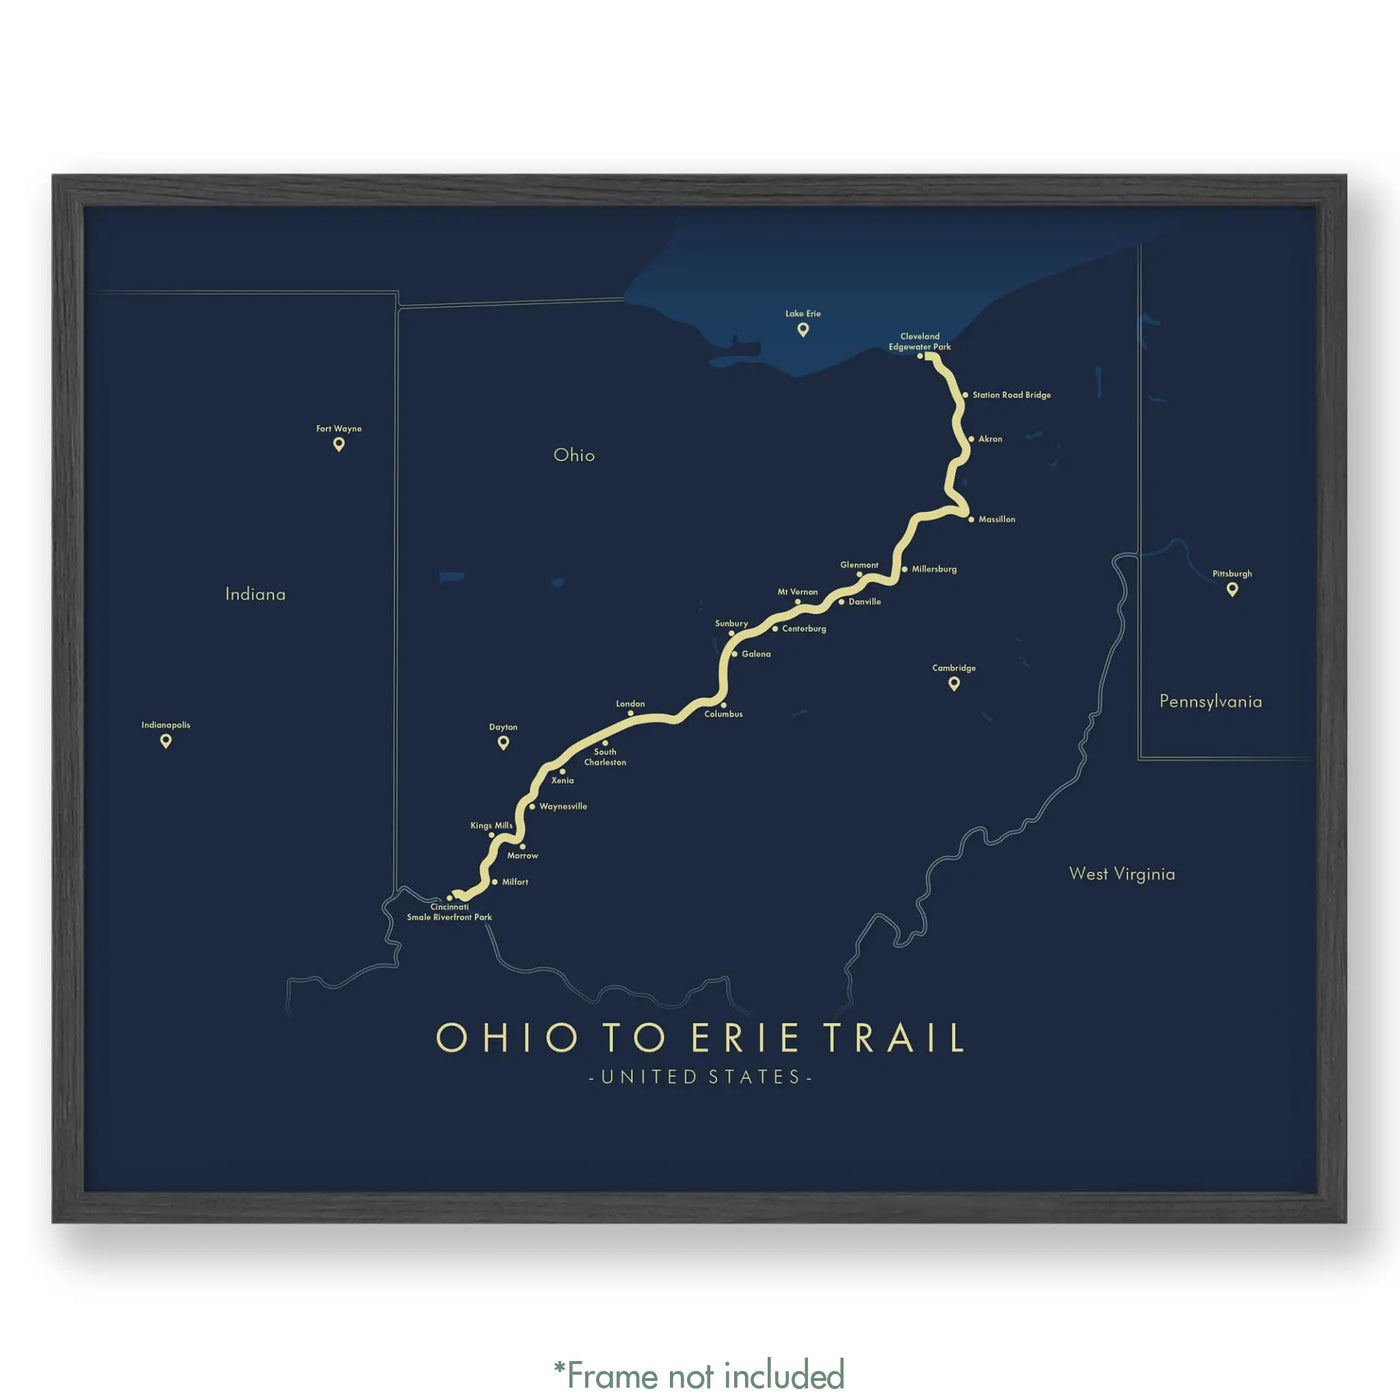 Trail Poster of Ohio to Erie Trail - Blue